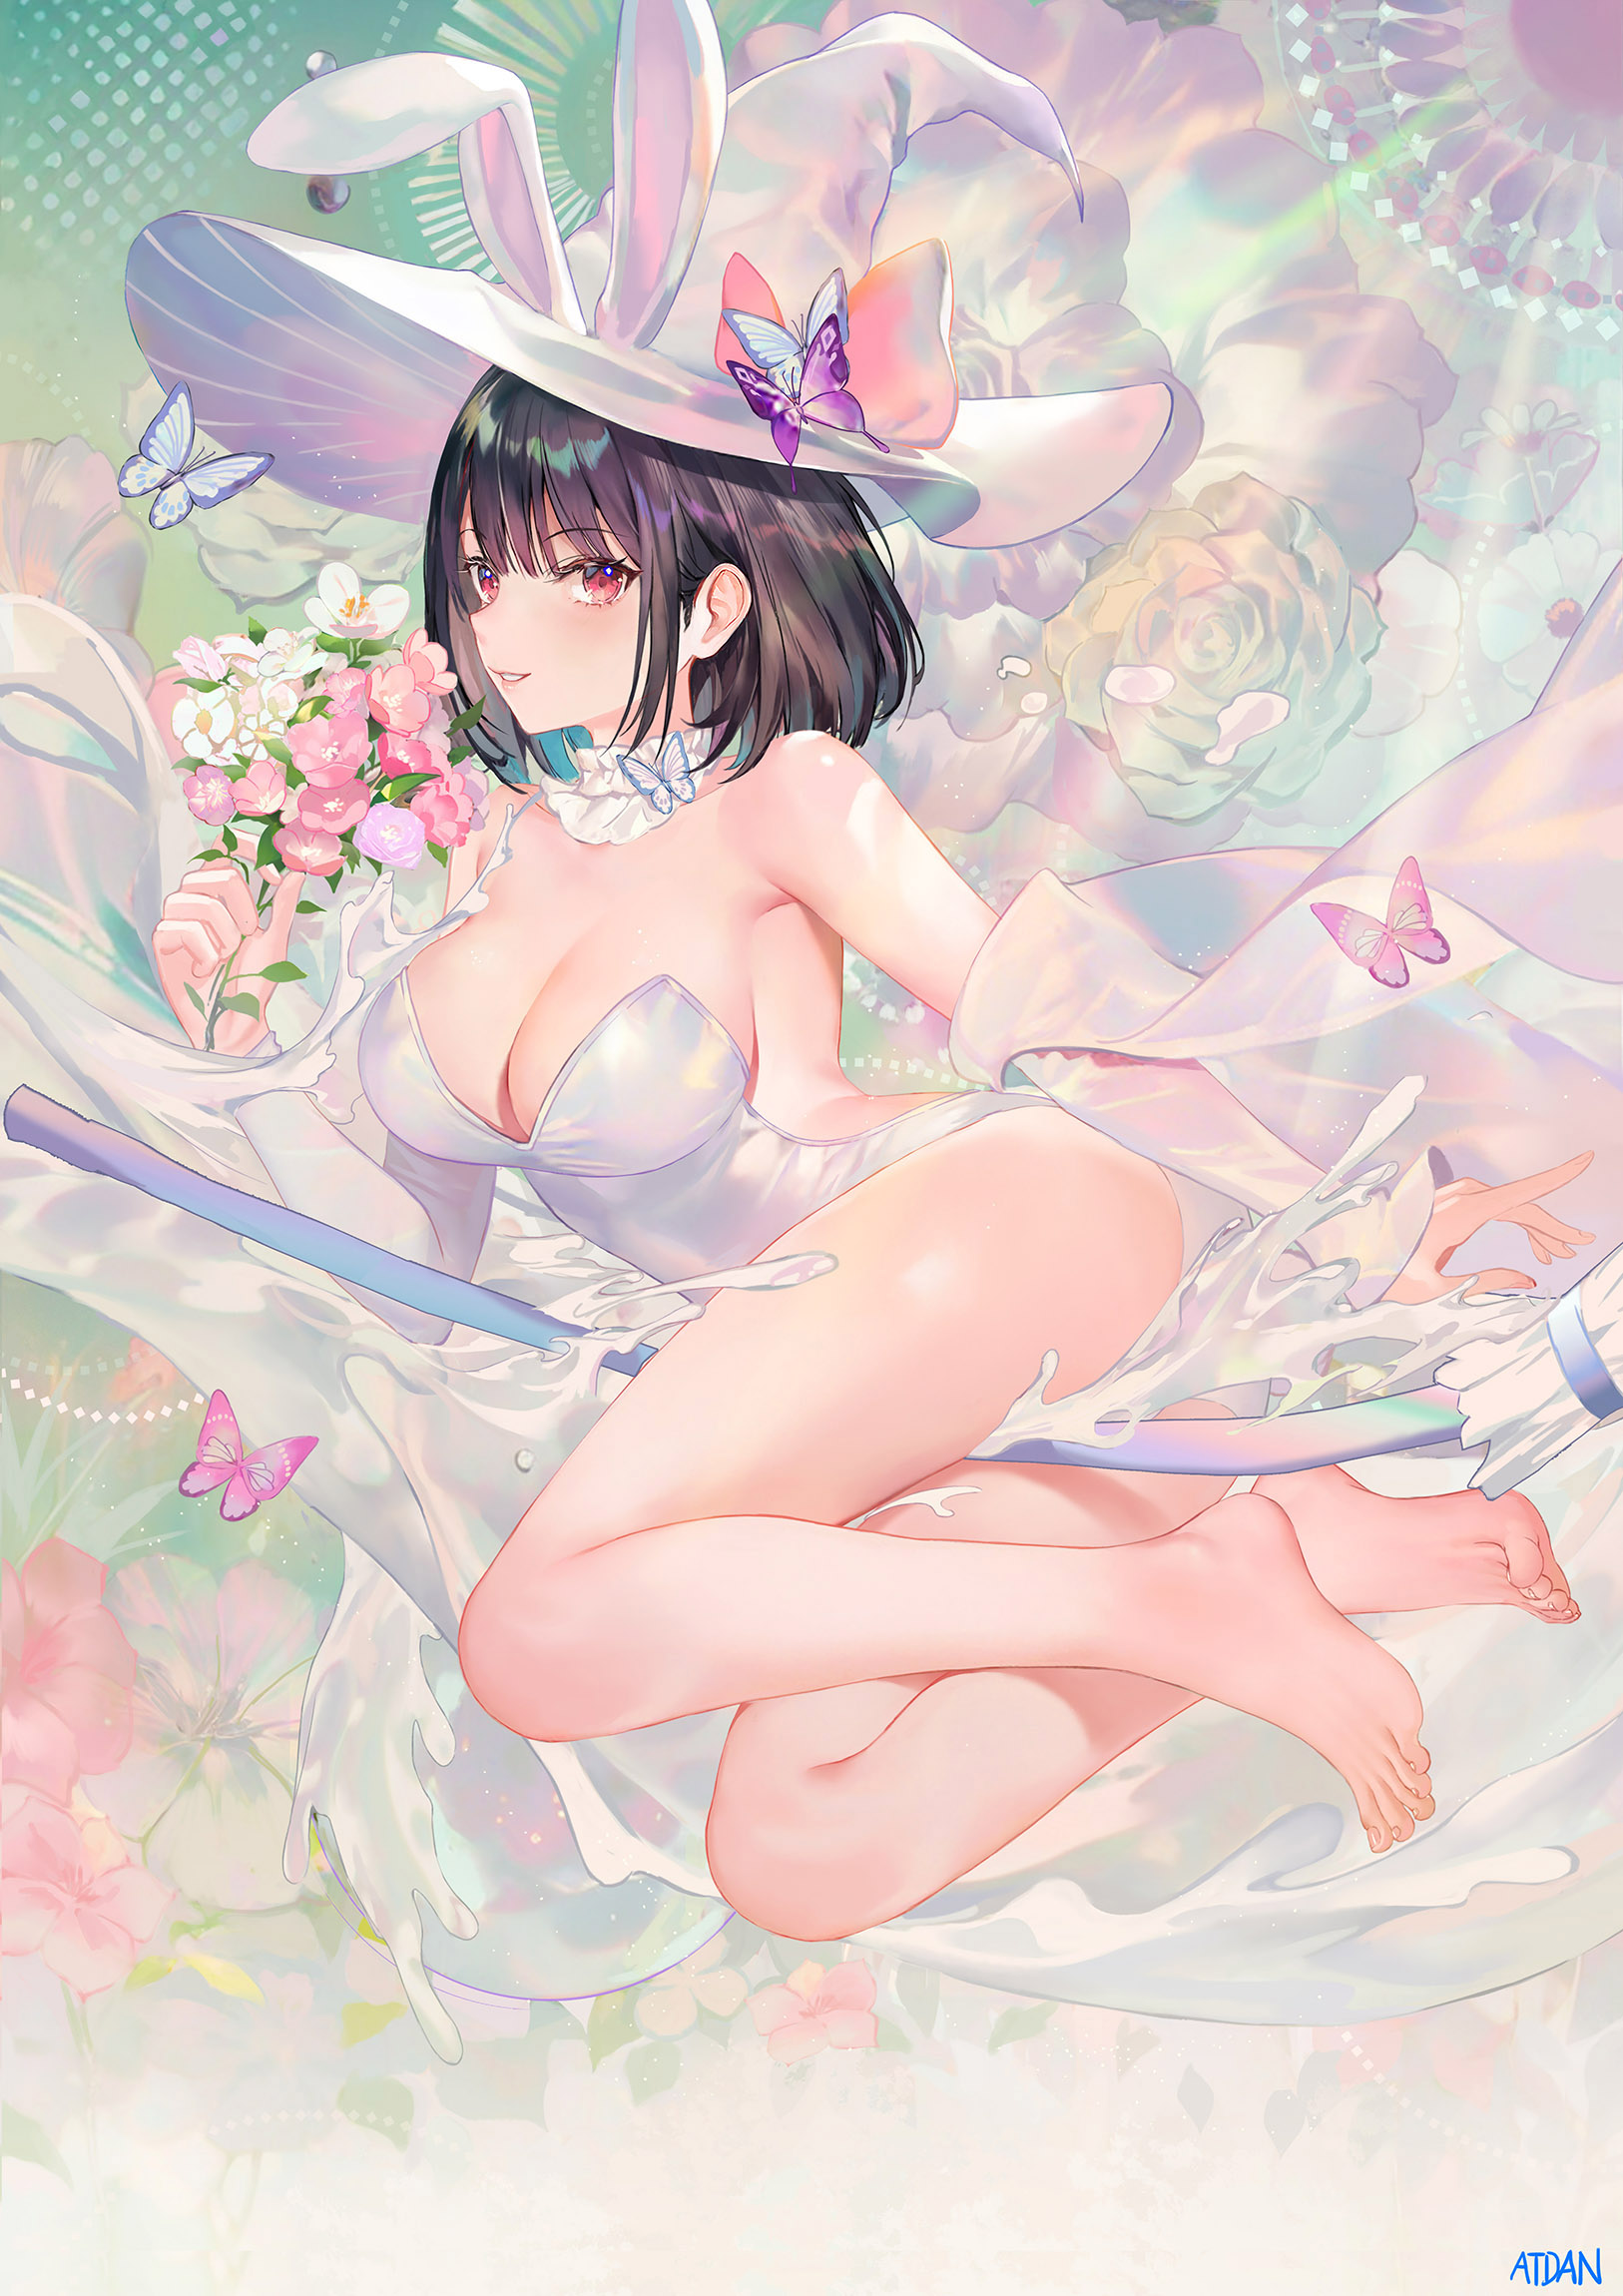 Anime 1626x2300 original characters bunny girl Atdan anime girls portrait display bunny suit bunny ears big boobs flowers butterfly feet witch hat hat